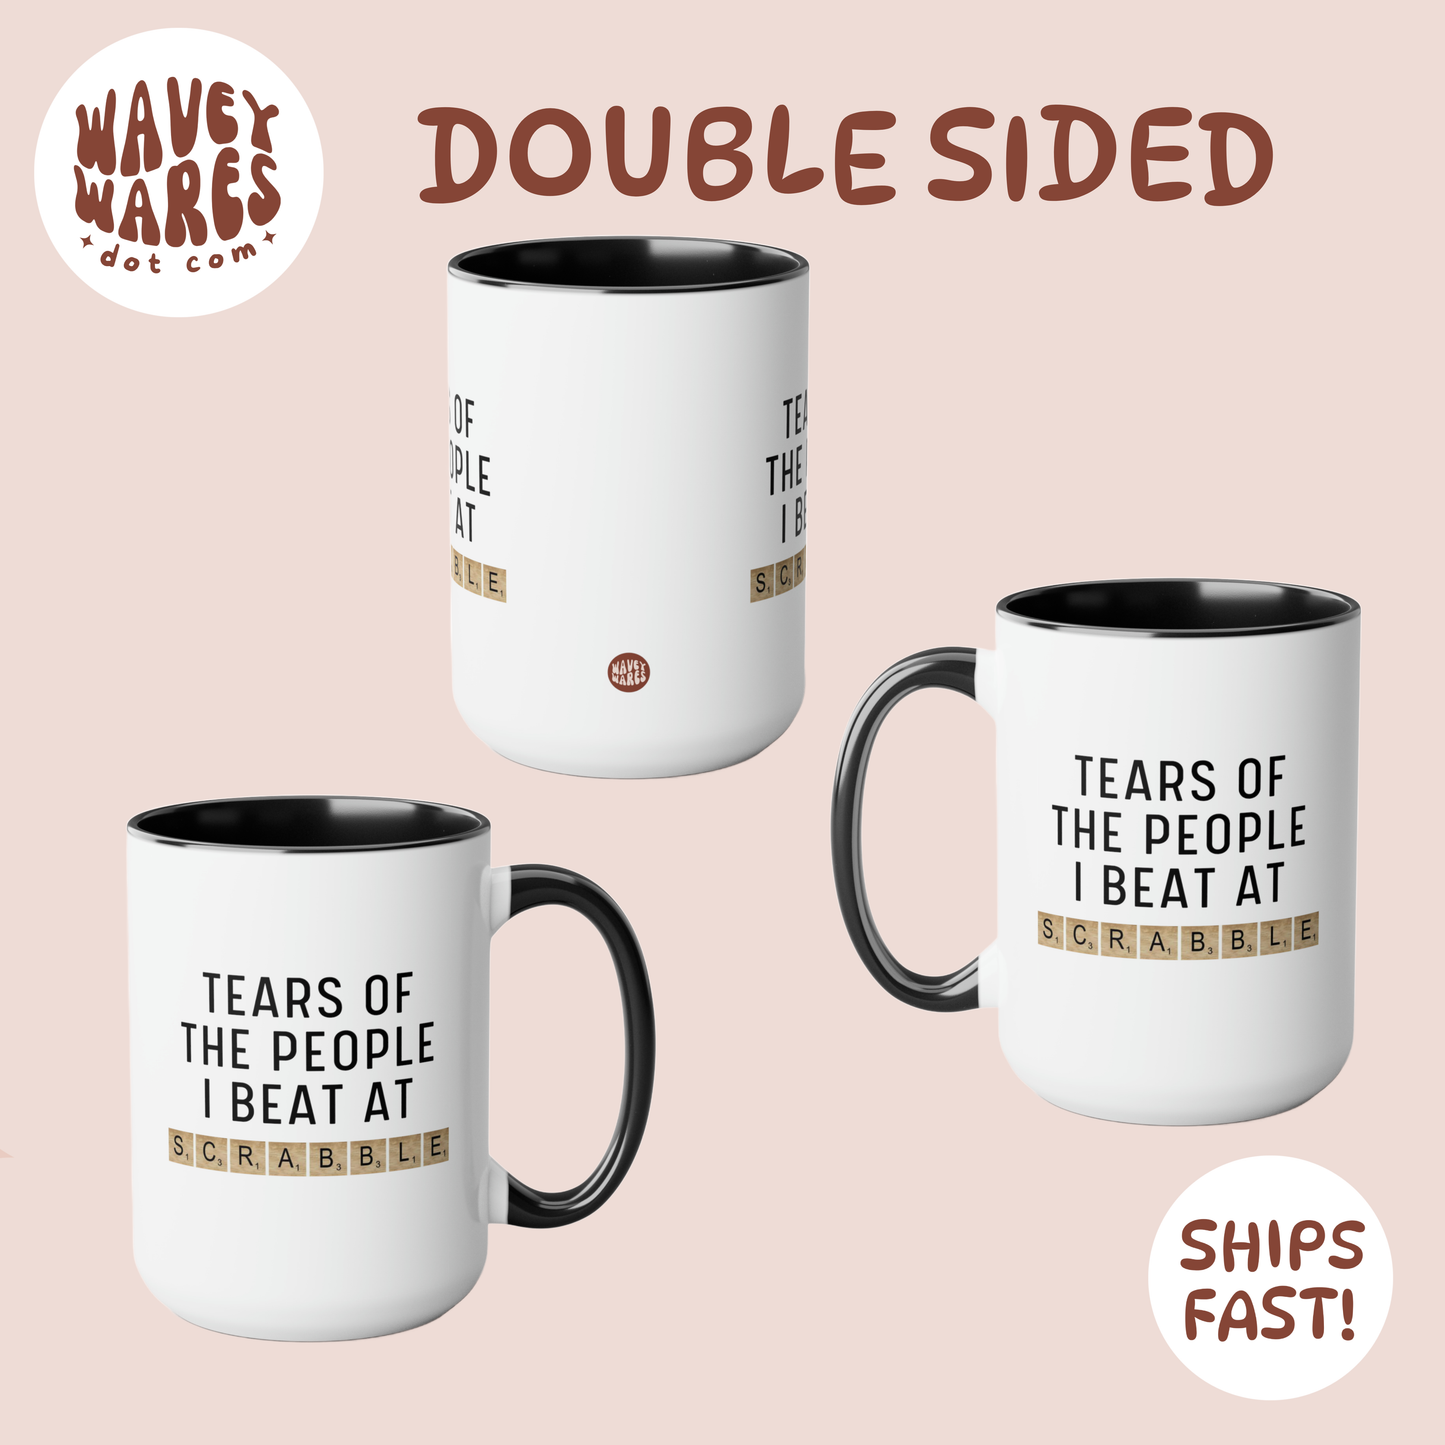 double sided background Tears of the People I Beat at Scrabble coffee mug waveywares wavey wares wavywares wavy wares